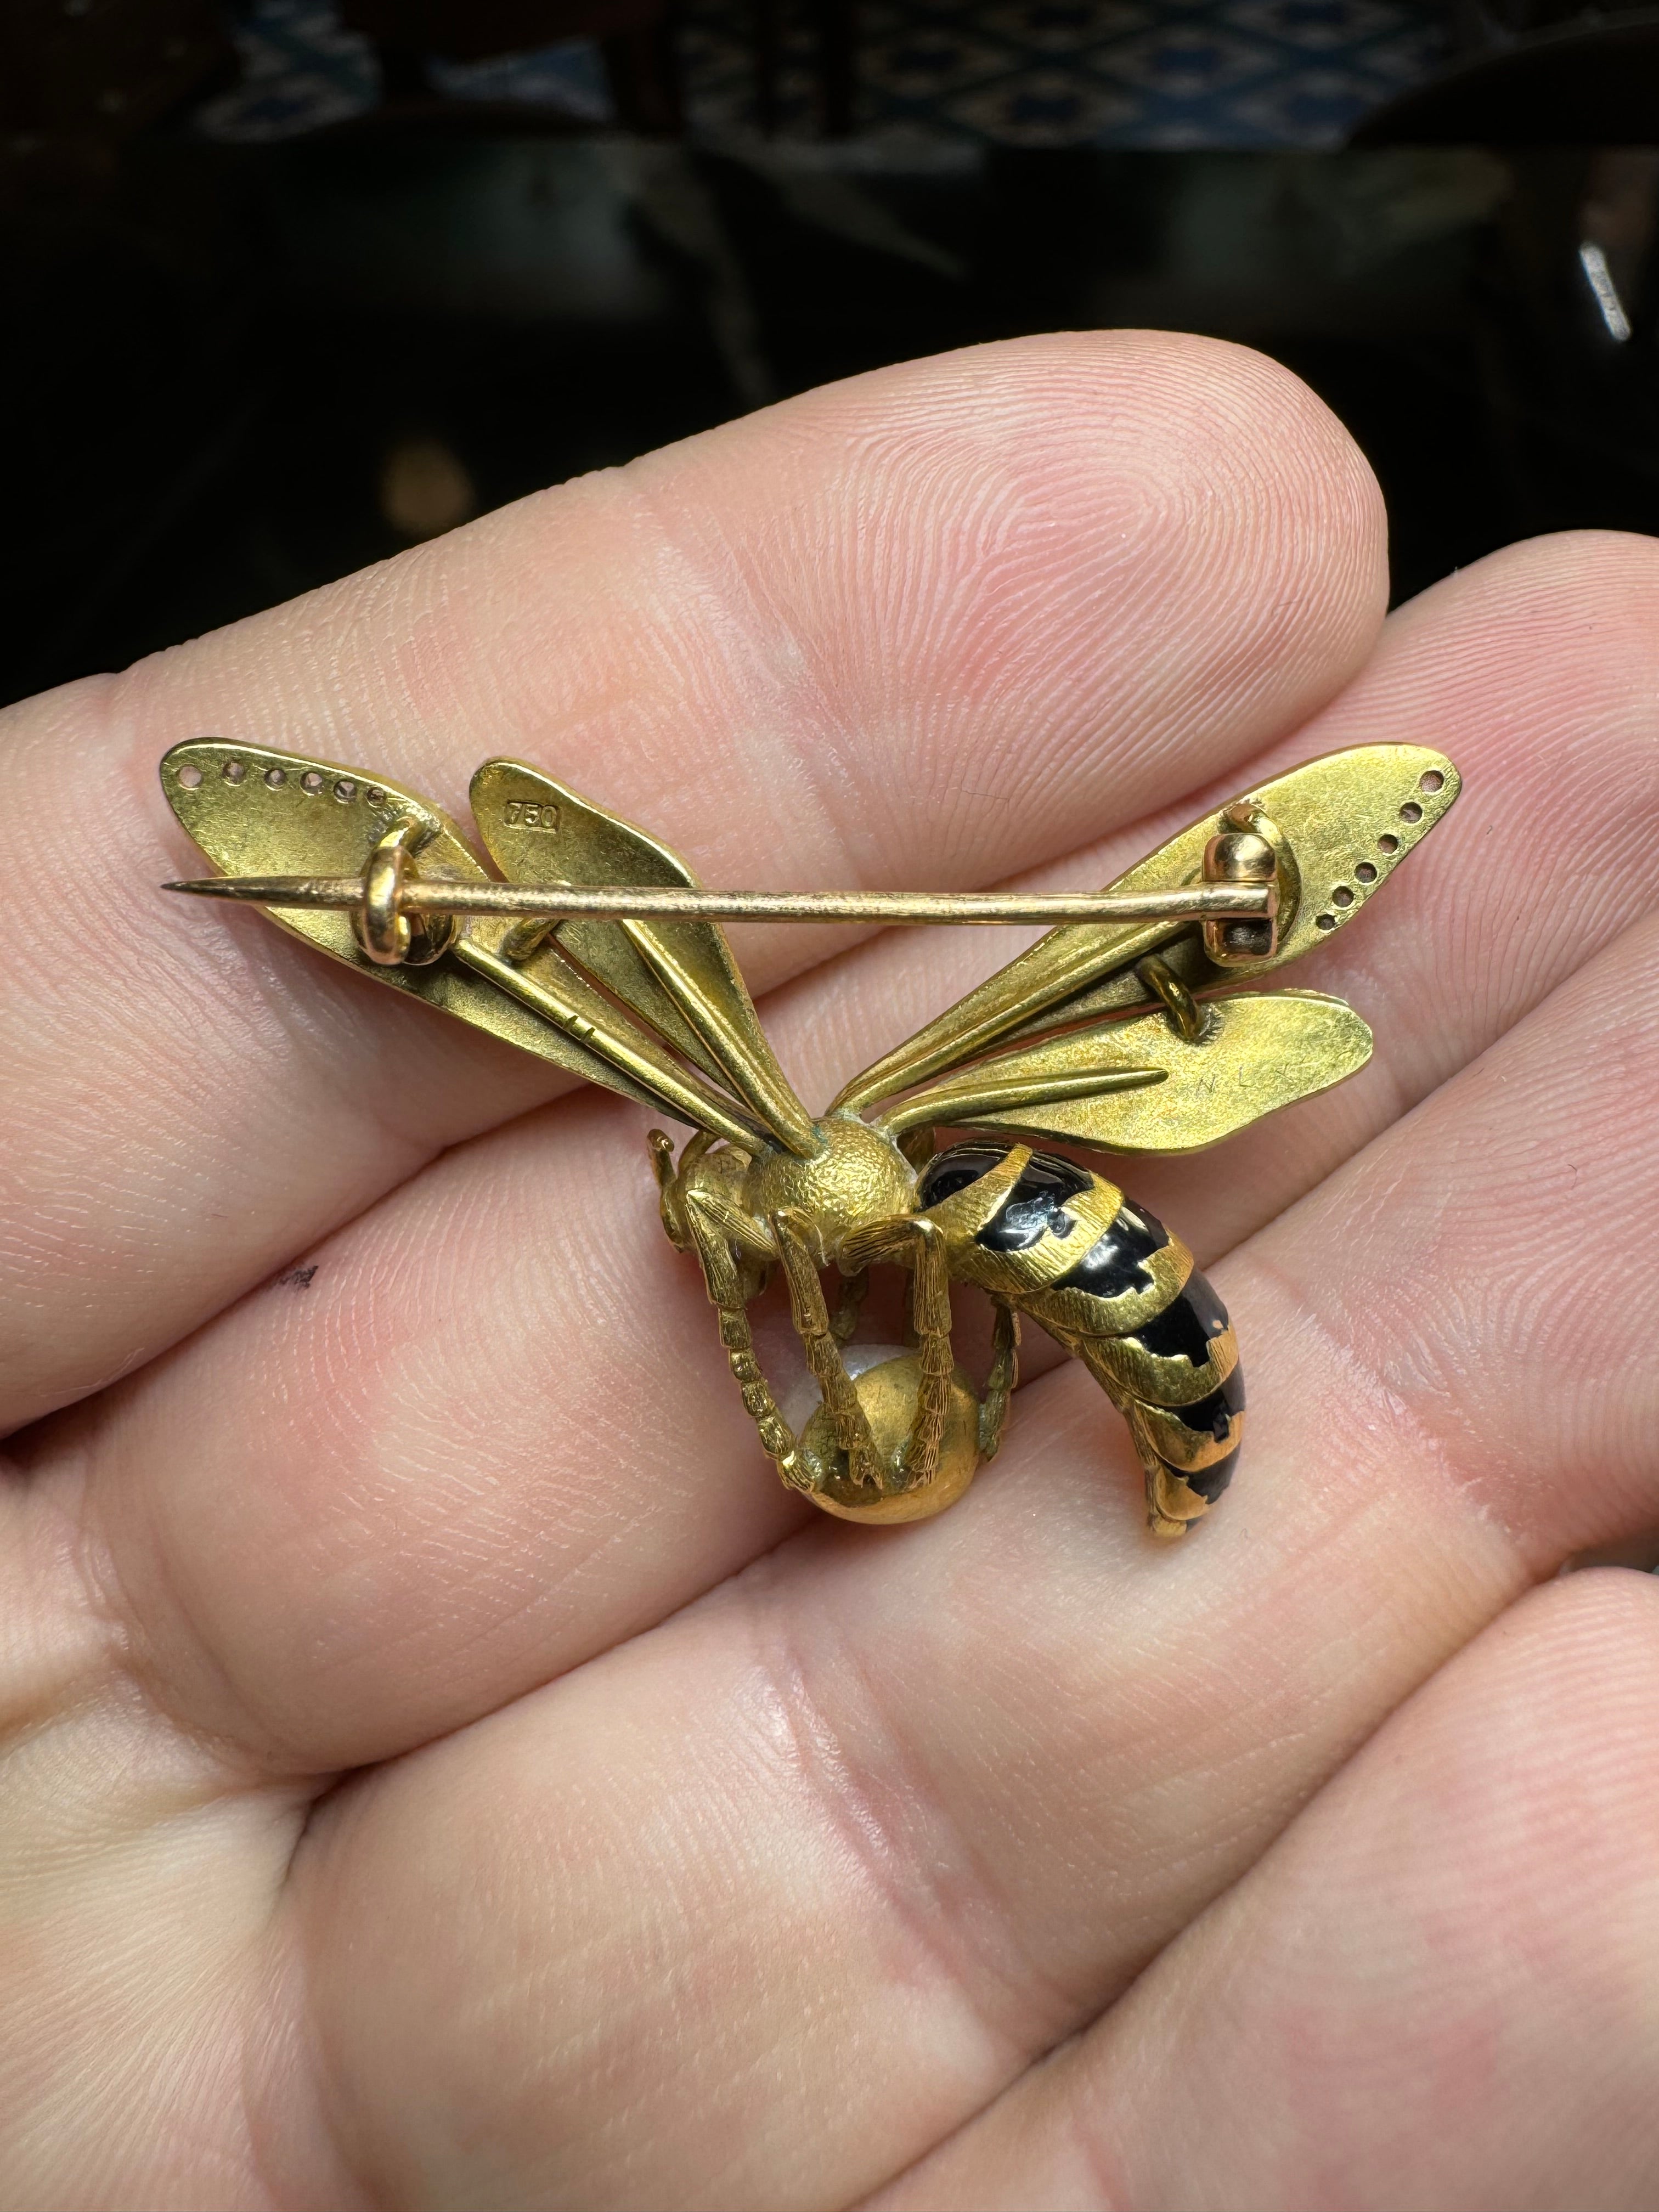 18k Yellow Gold, Enamel Diamond & Natural Pearl Wasp or Hornet Brooch